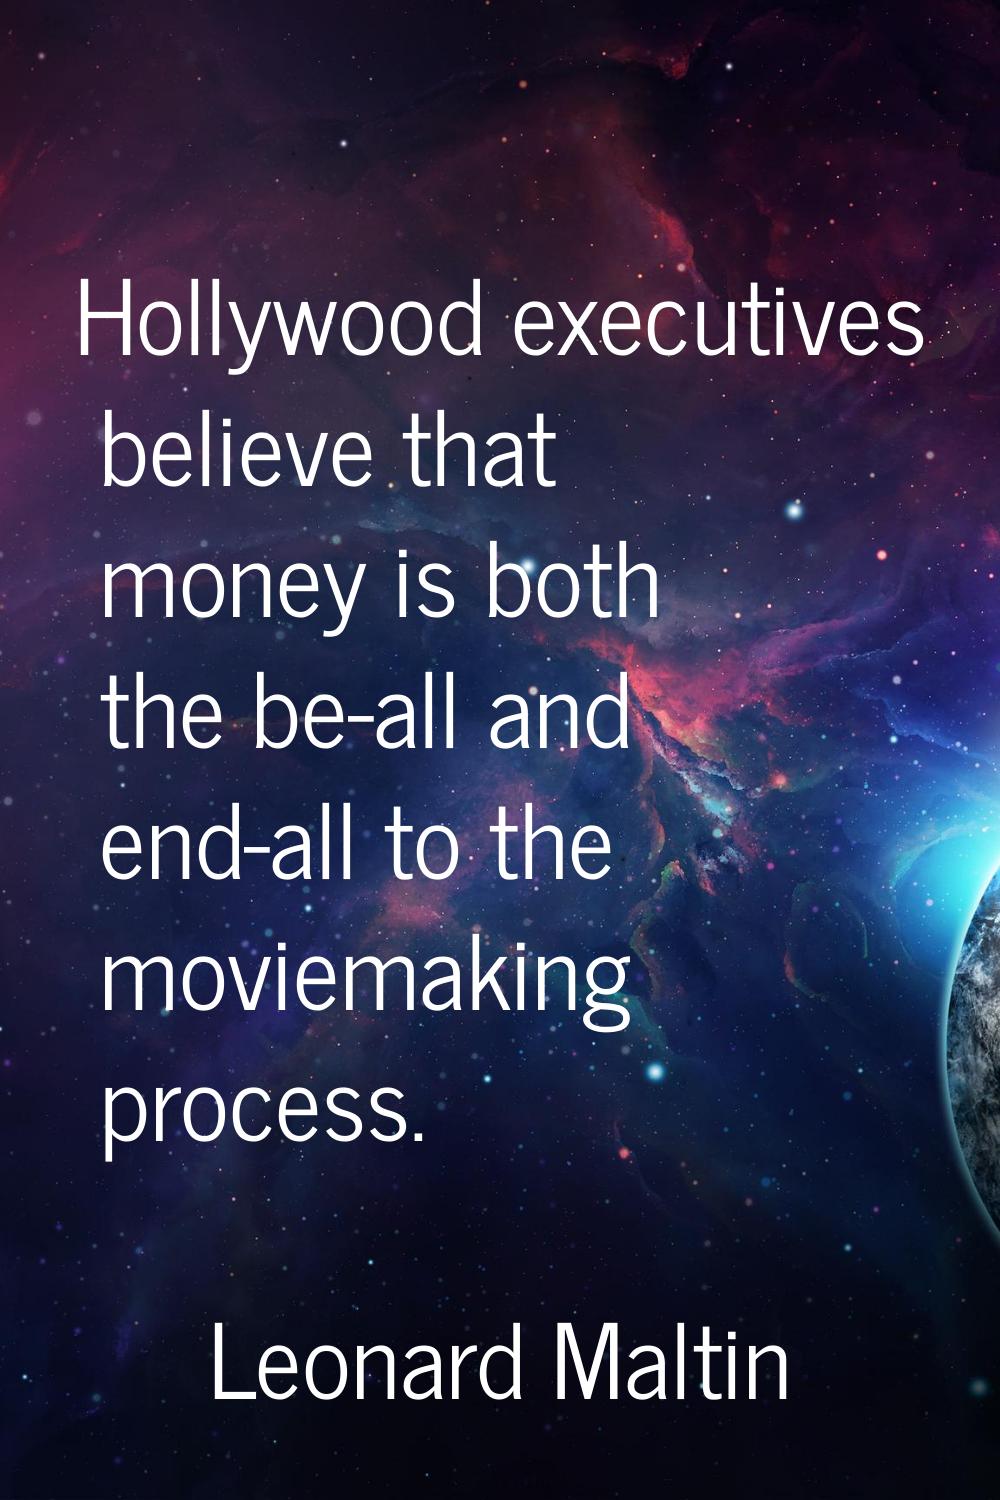 Hollywood executives believe that money is both the be-all and end-all to the moviemaking process.